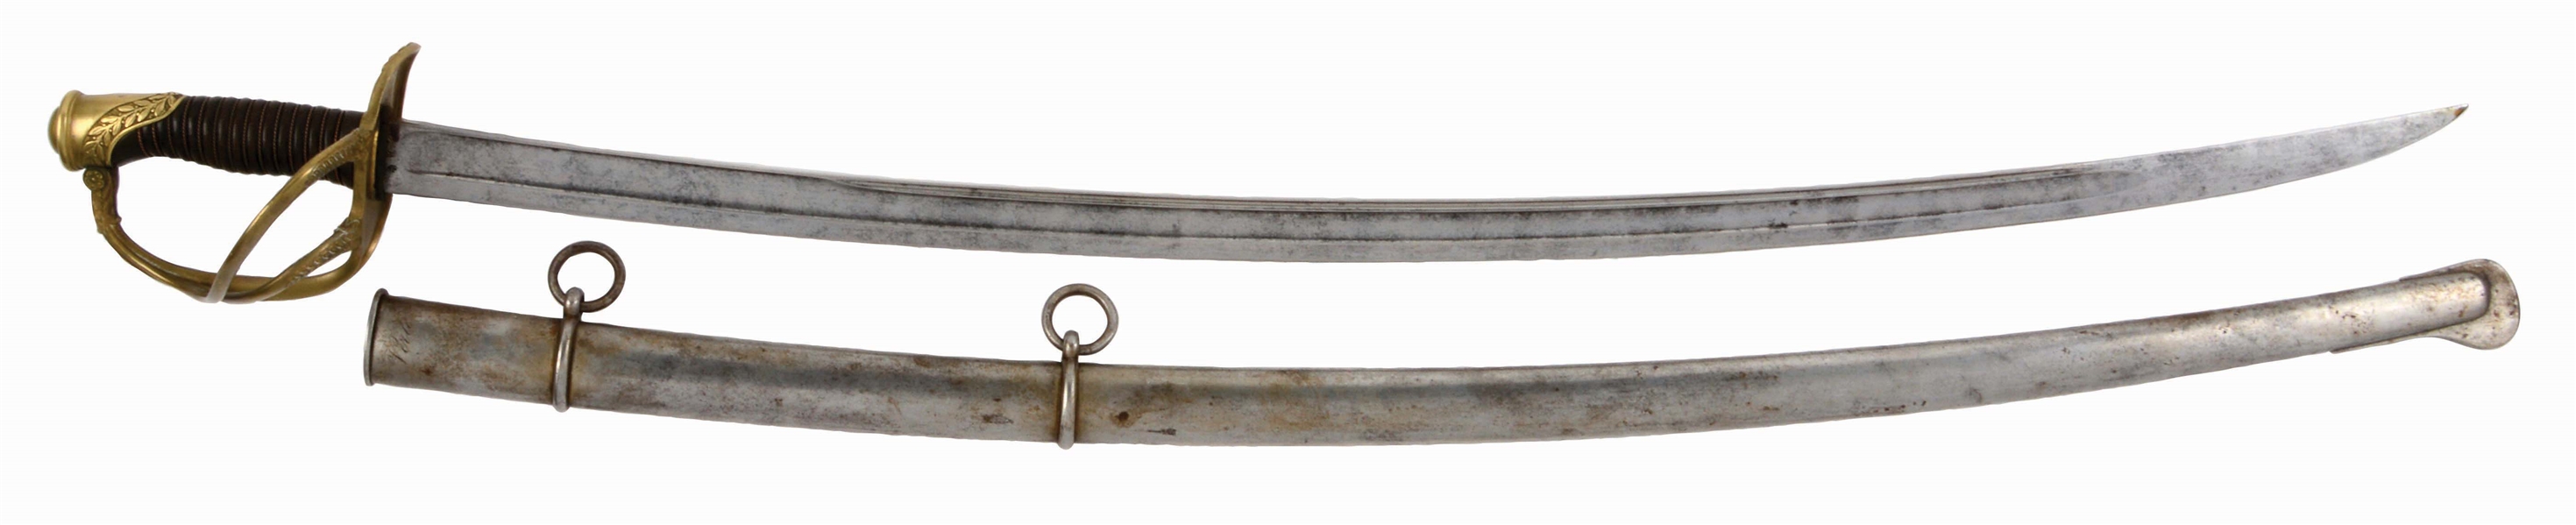 FRENCH CAVALRY OFFICER SABER DATED 1864.